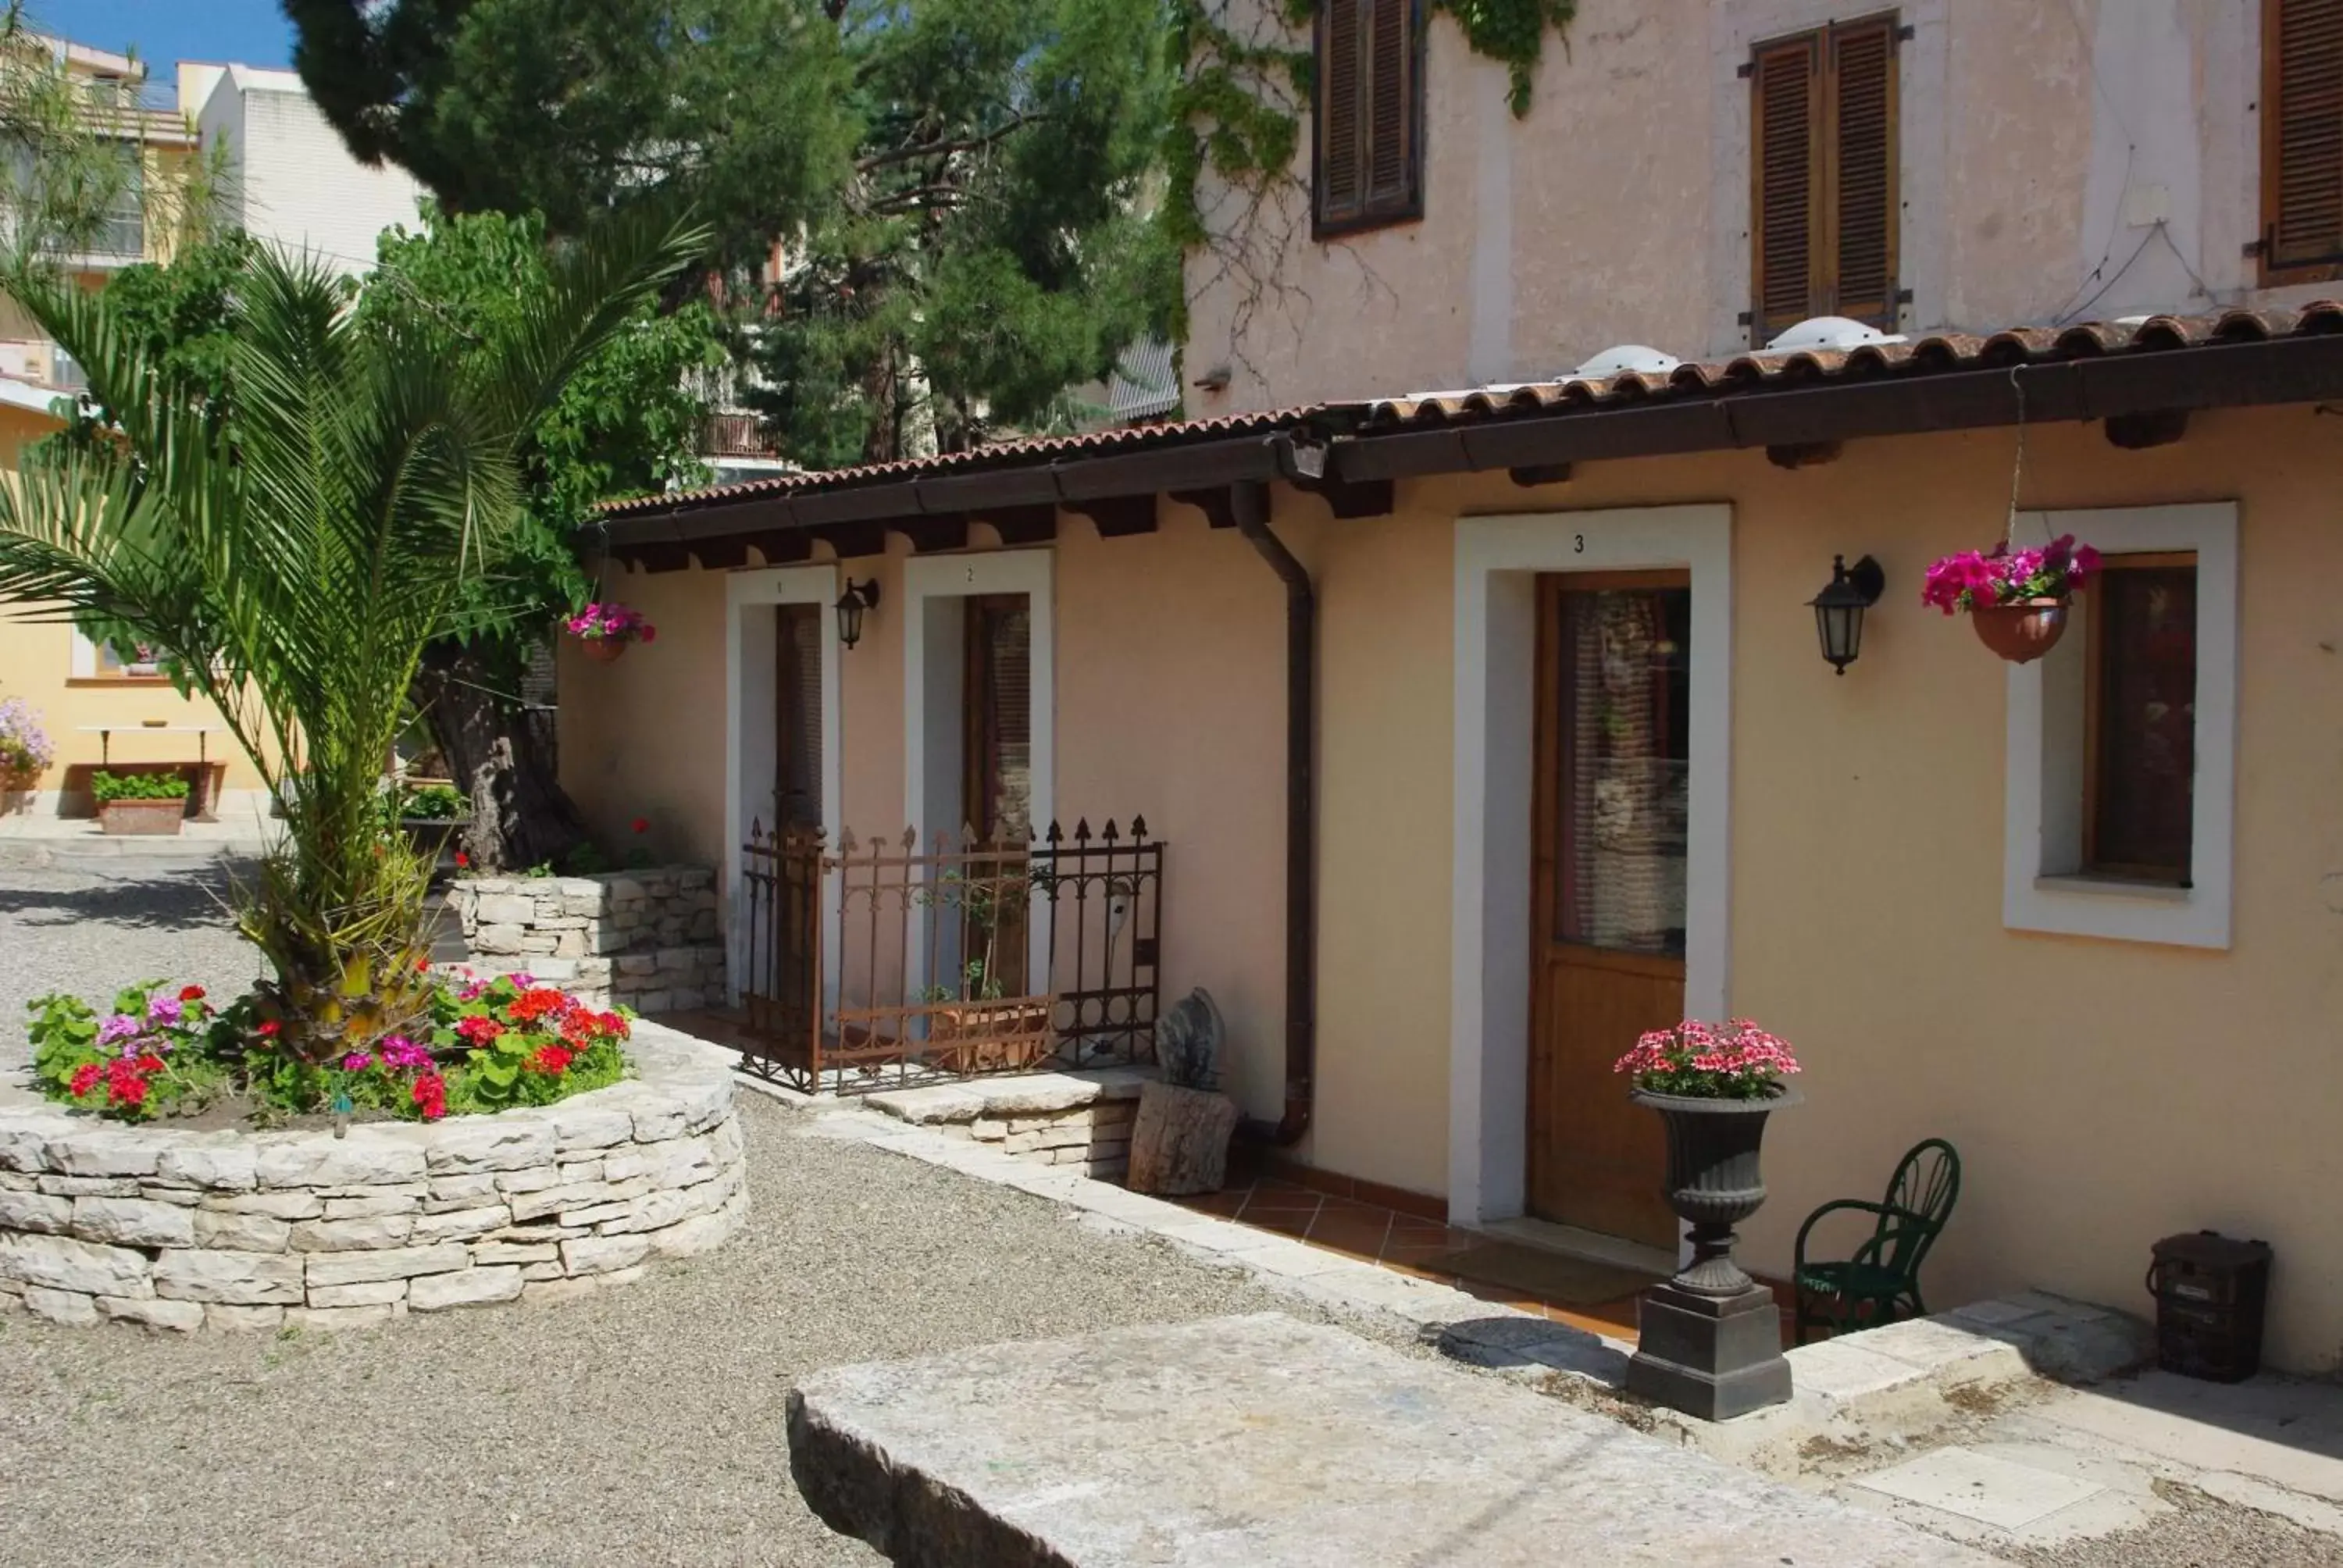 Property Building in B&B Vecchia Suppenna